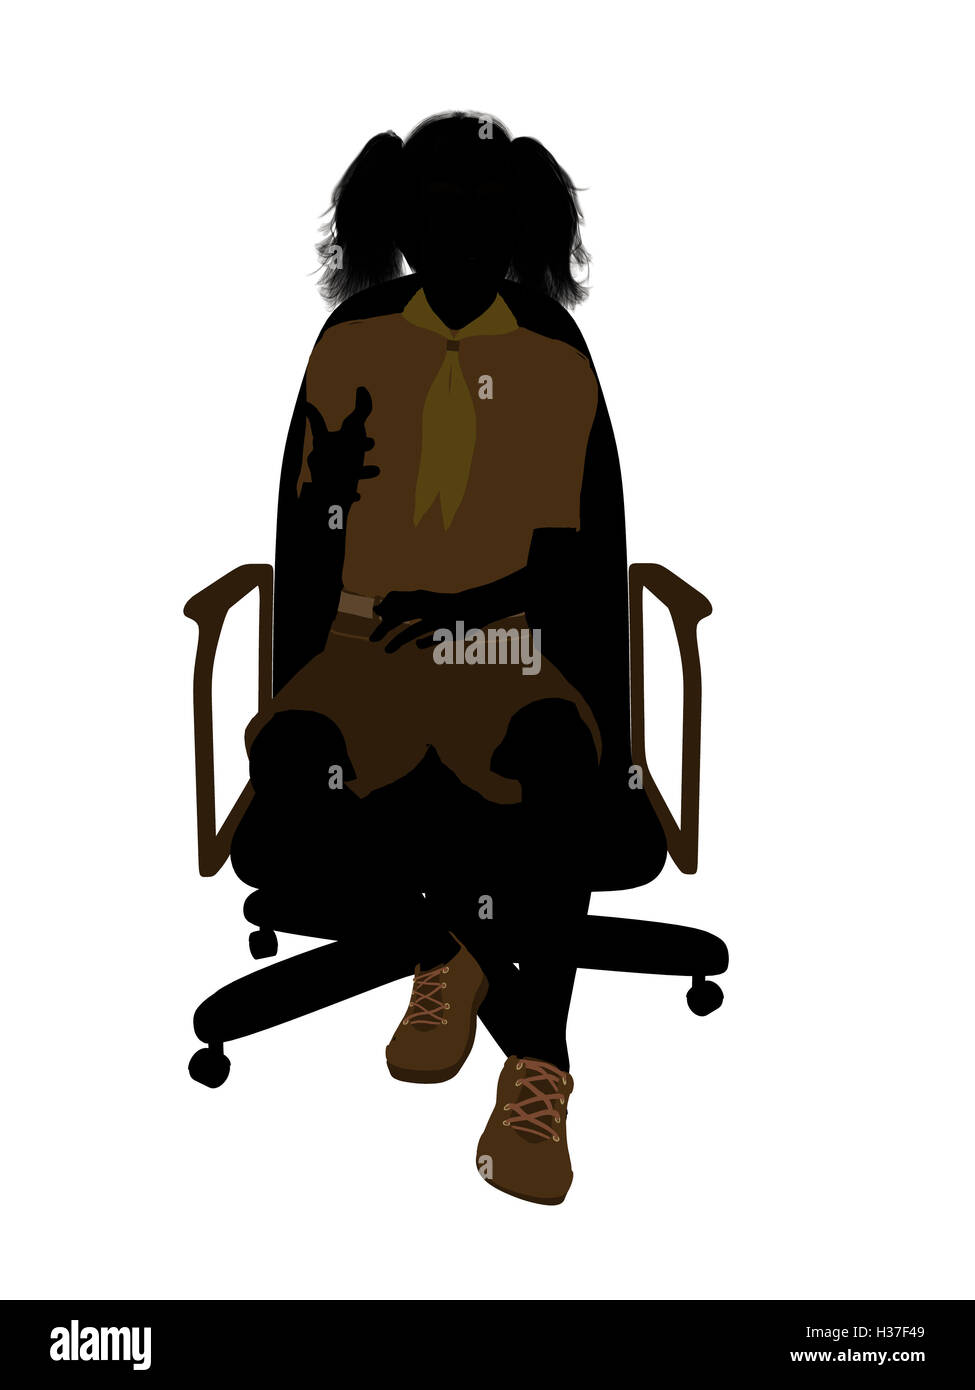 Girl Scout Sitting On A Chair Illustration Silhouette Stock Photo